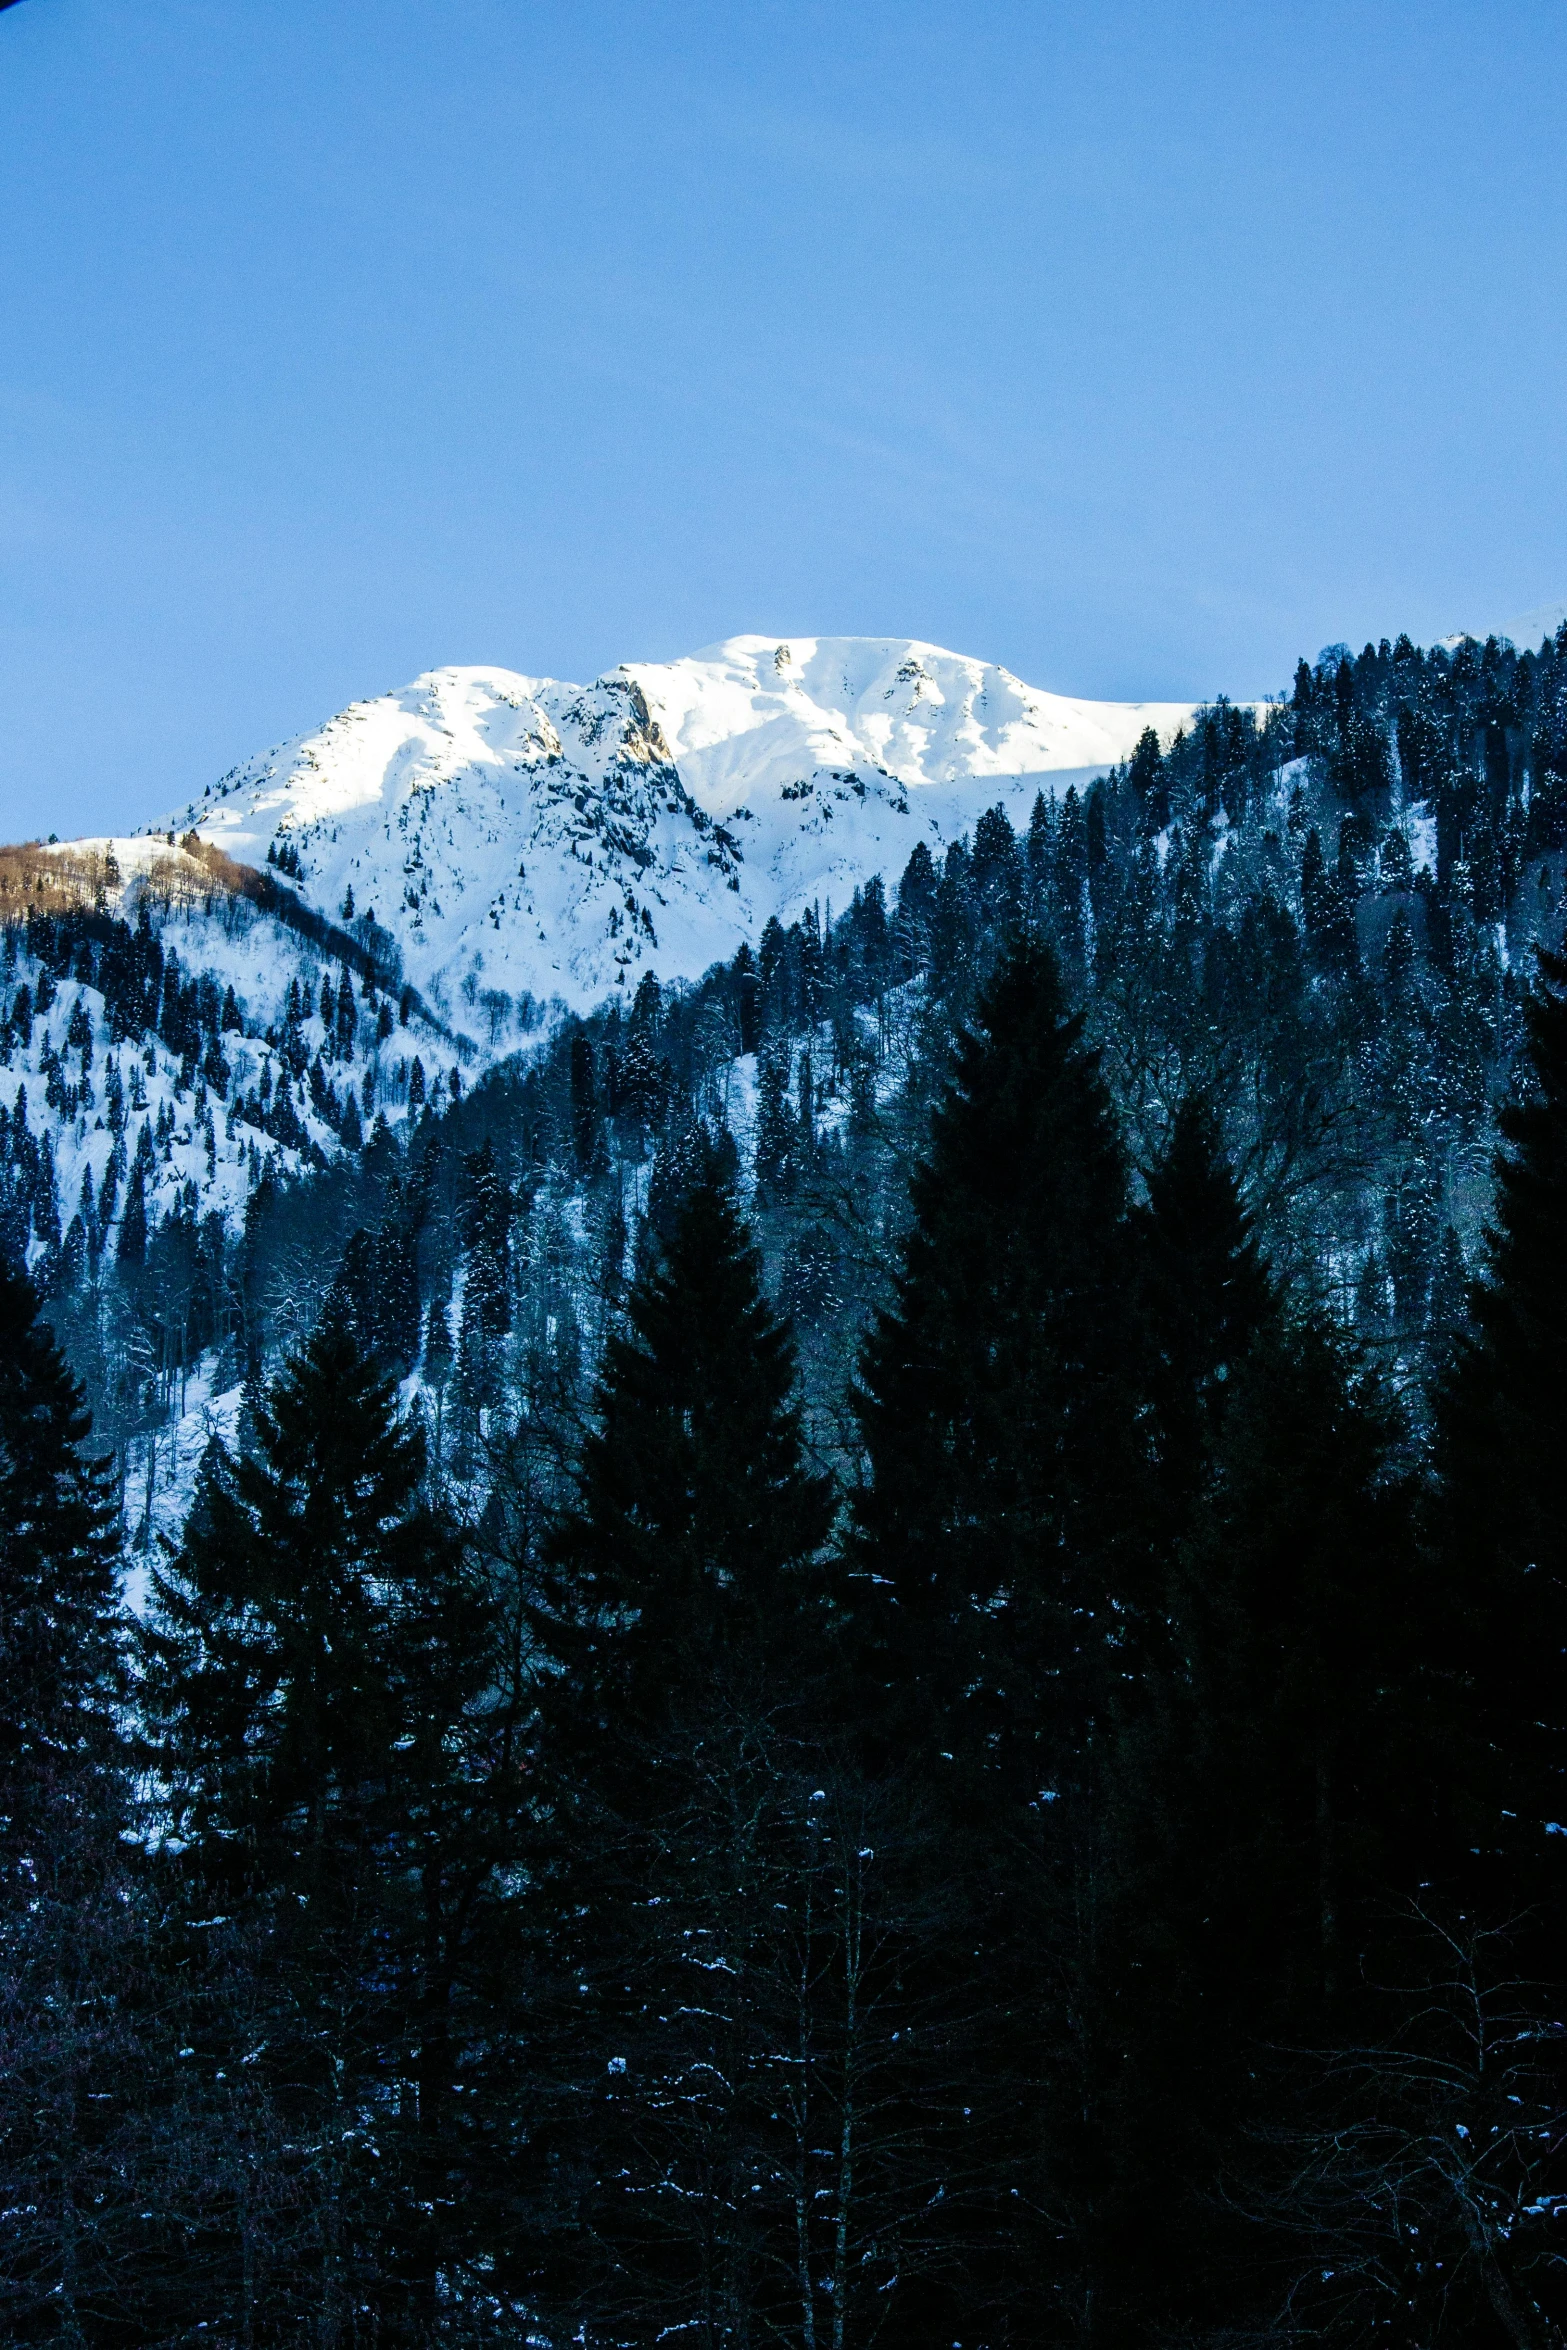 a scenic snowy mountain scene with trees